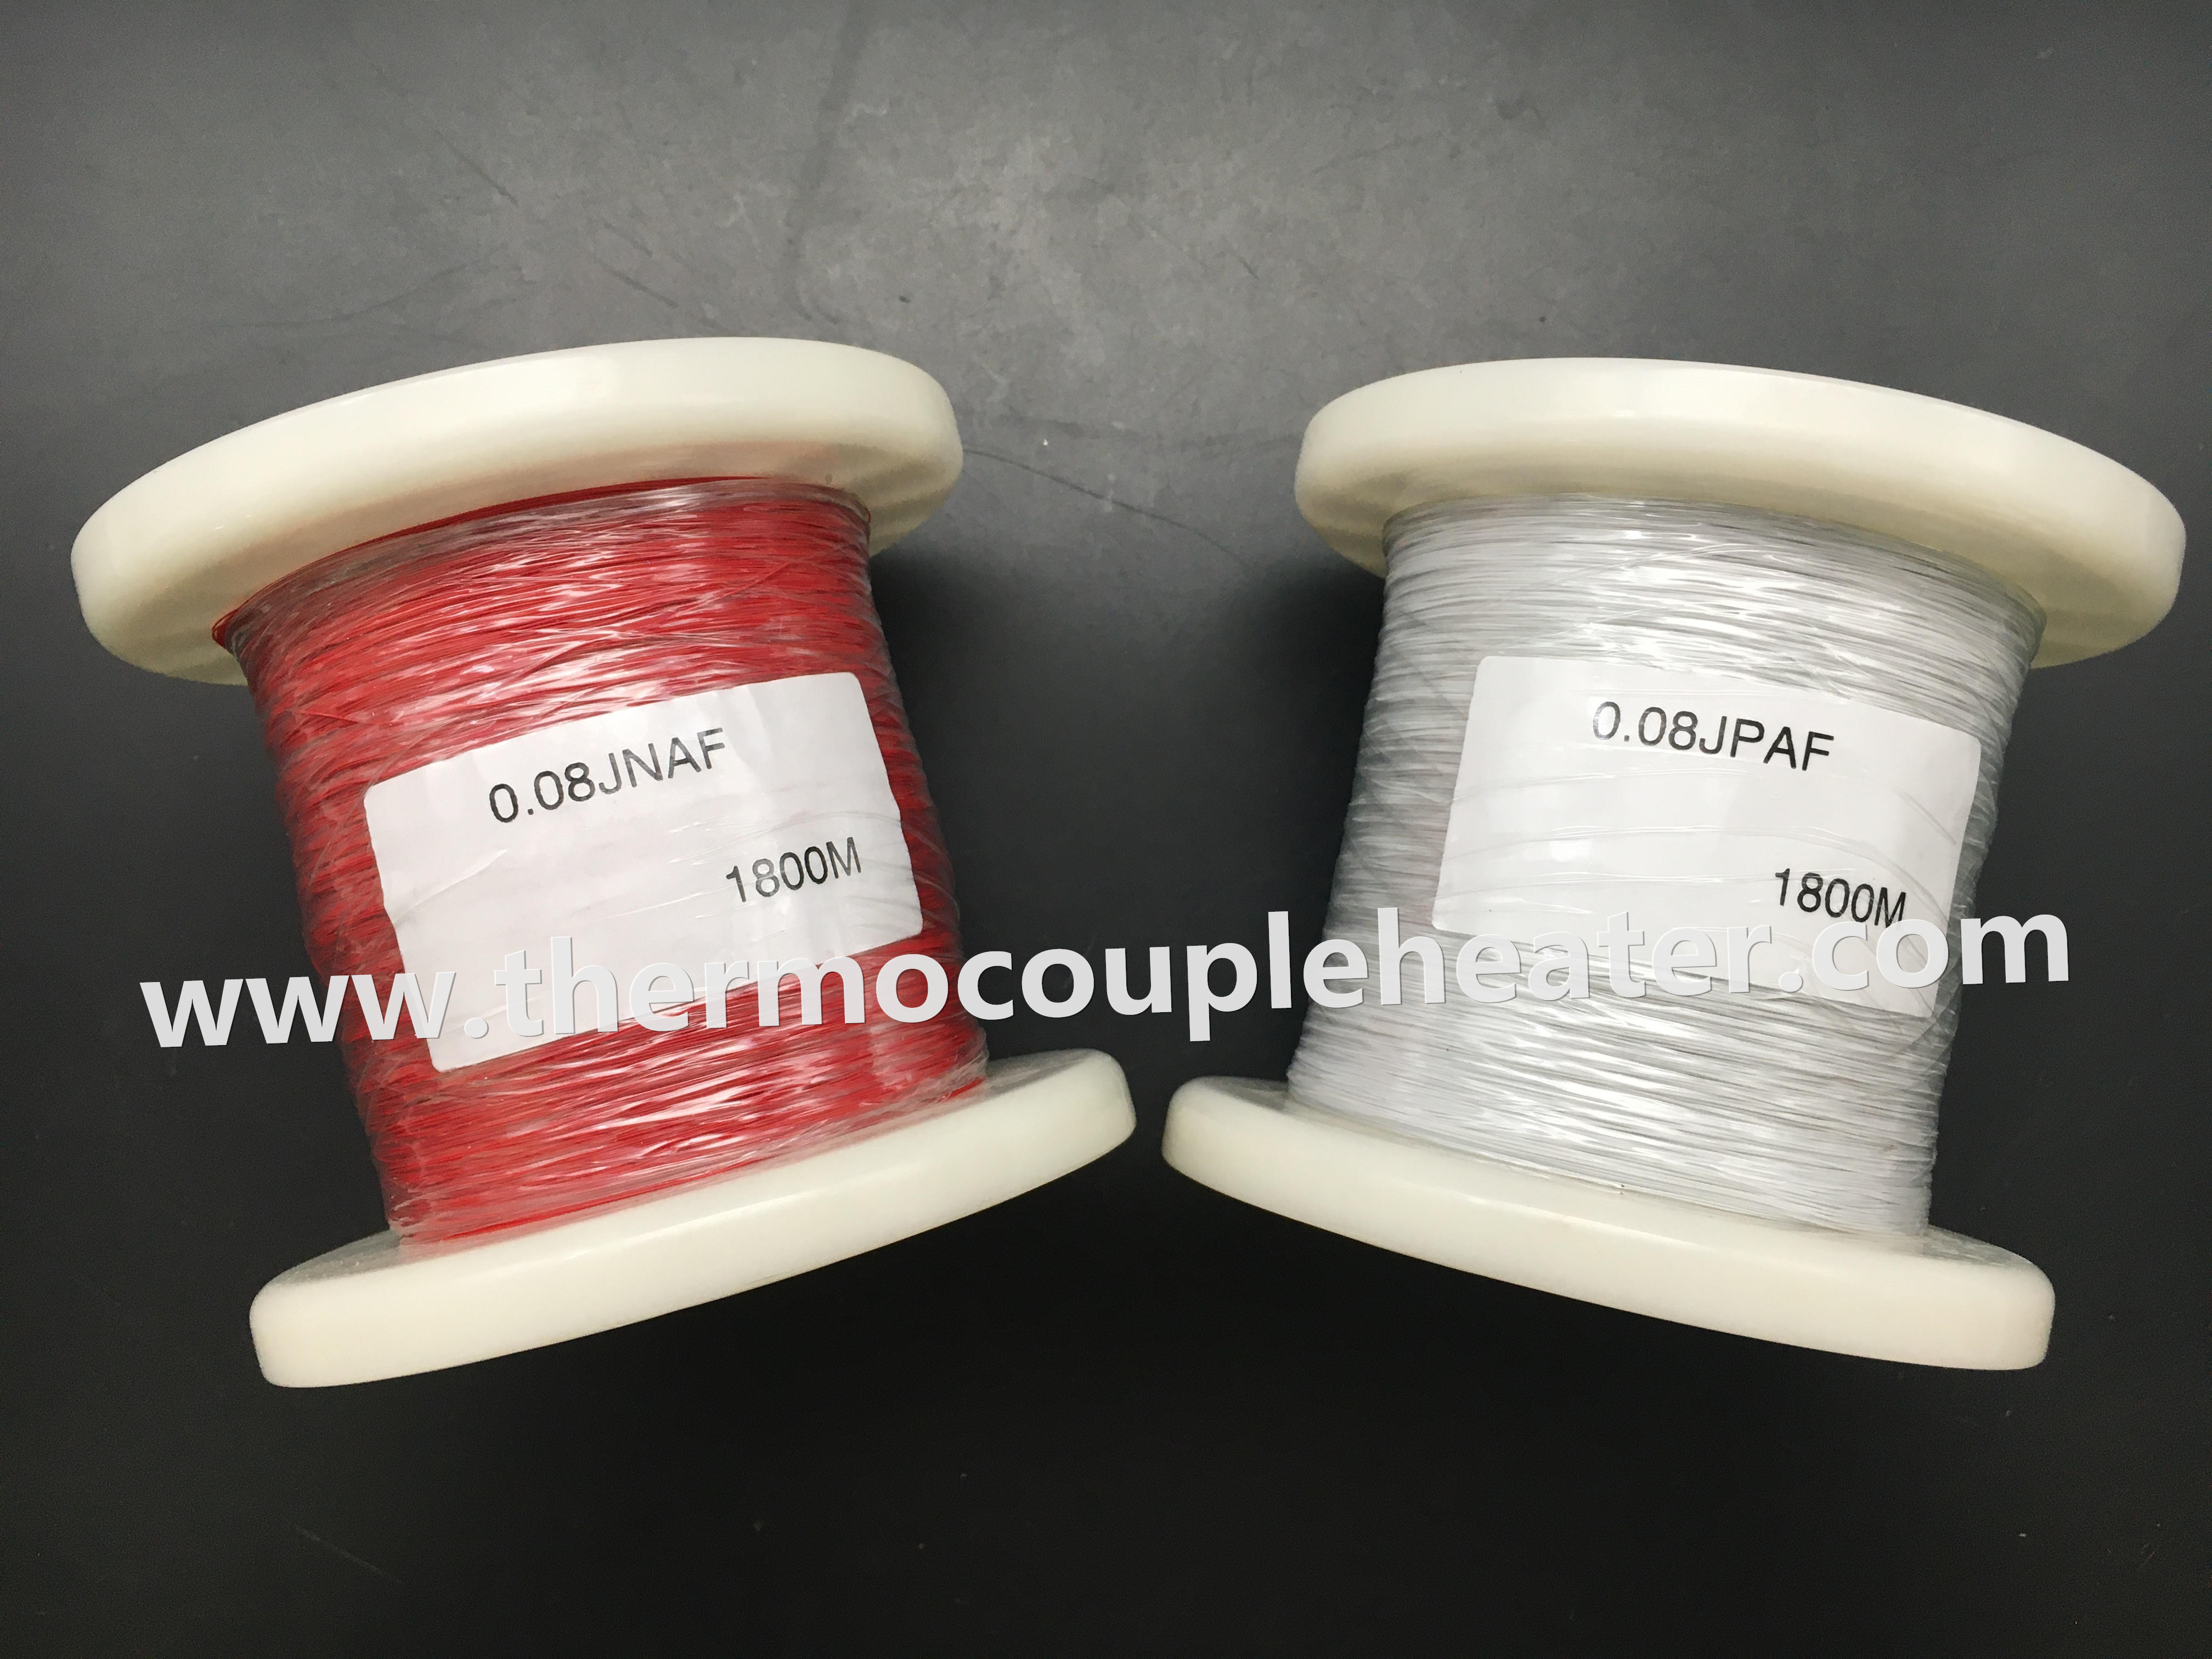 Customized Thermocouple Cable J 40AWG 0.08mm With Teflon Coating